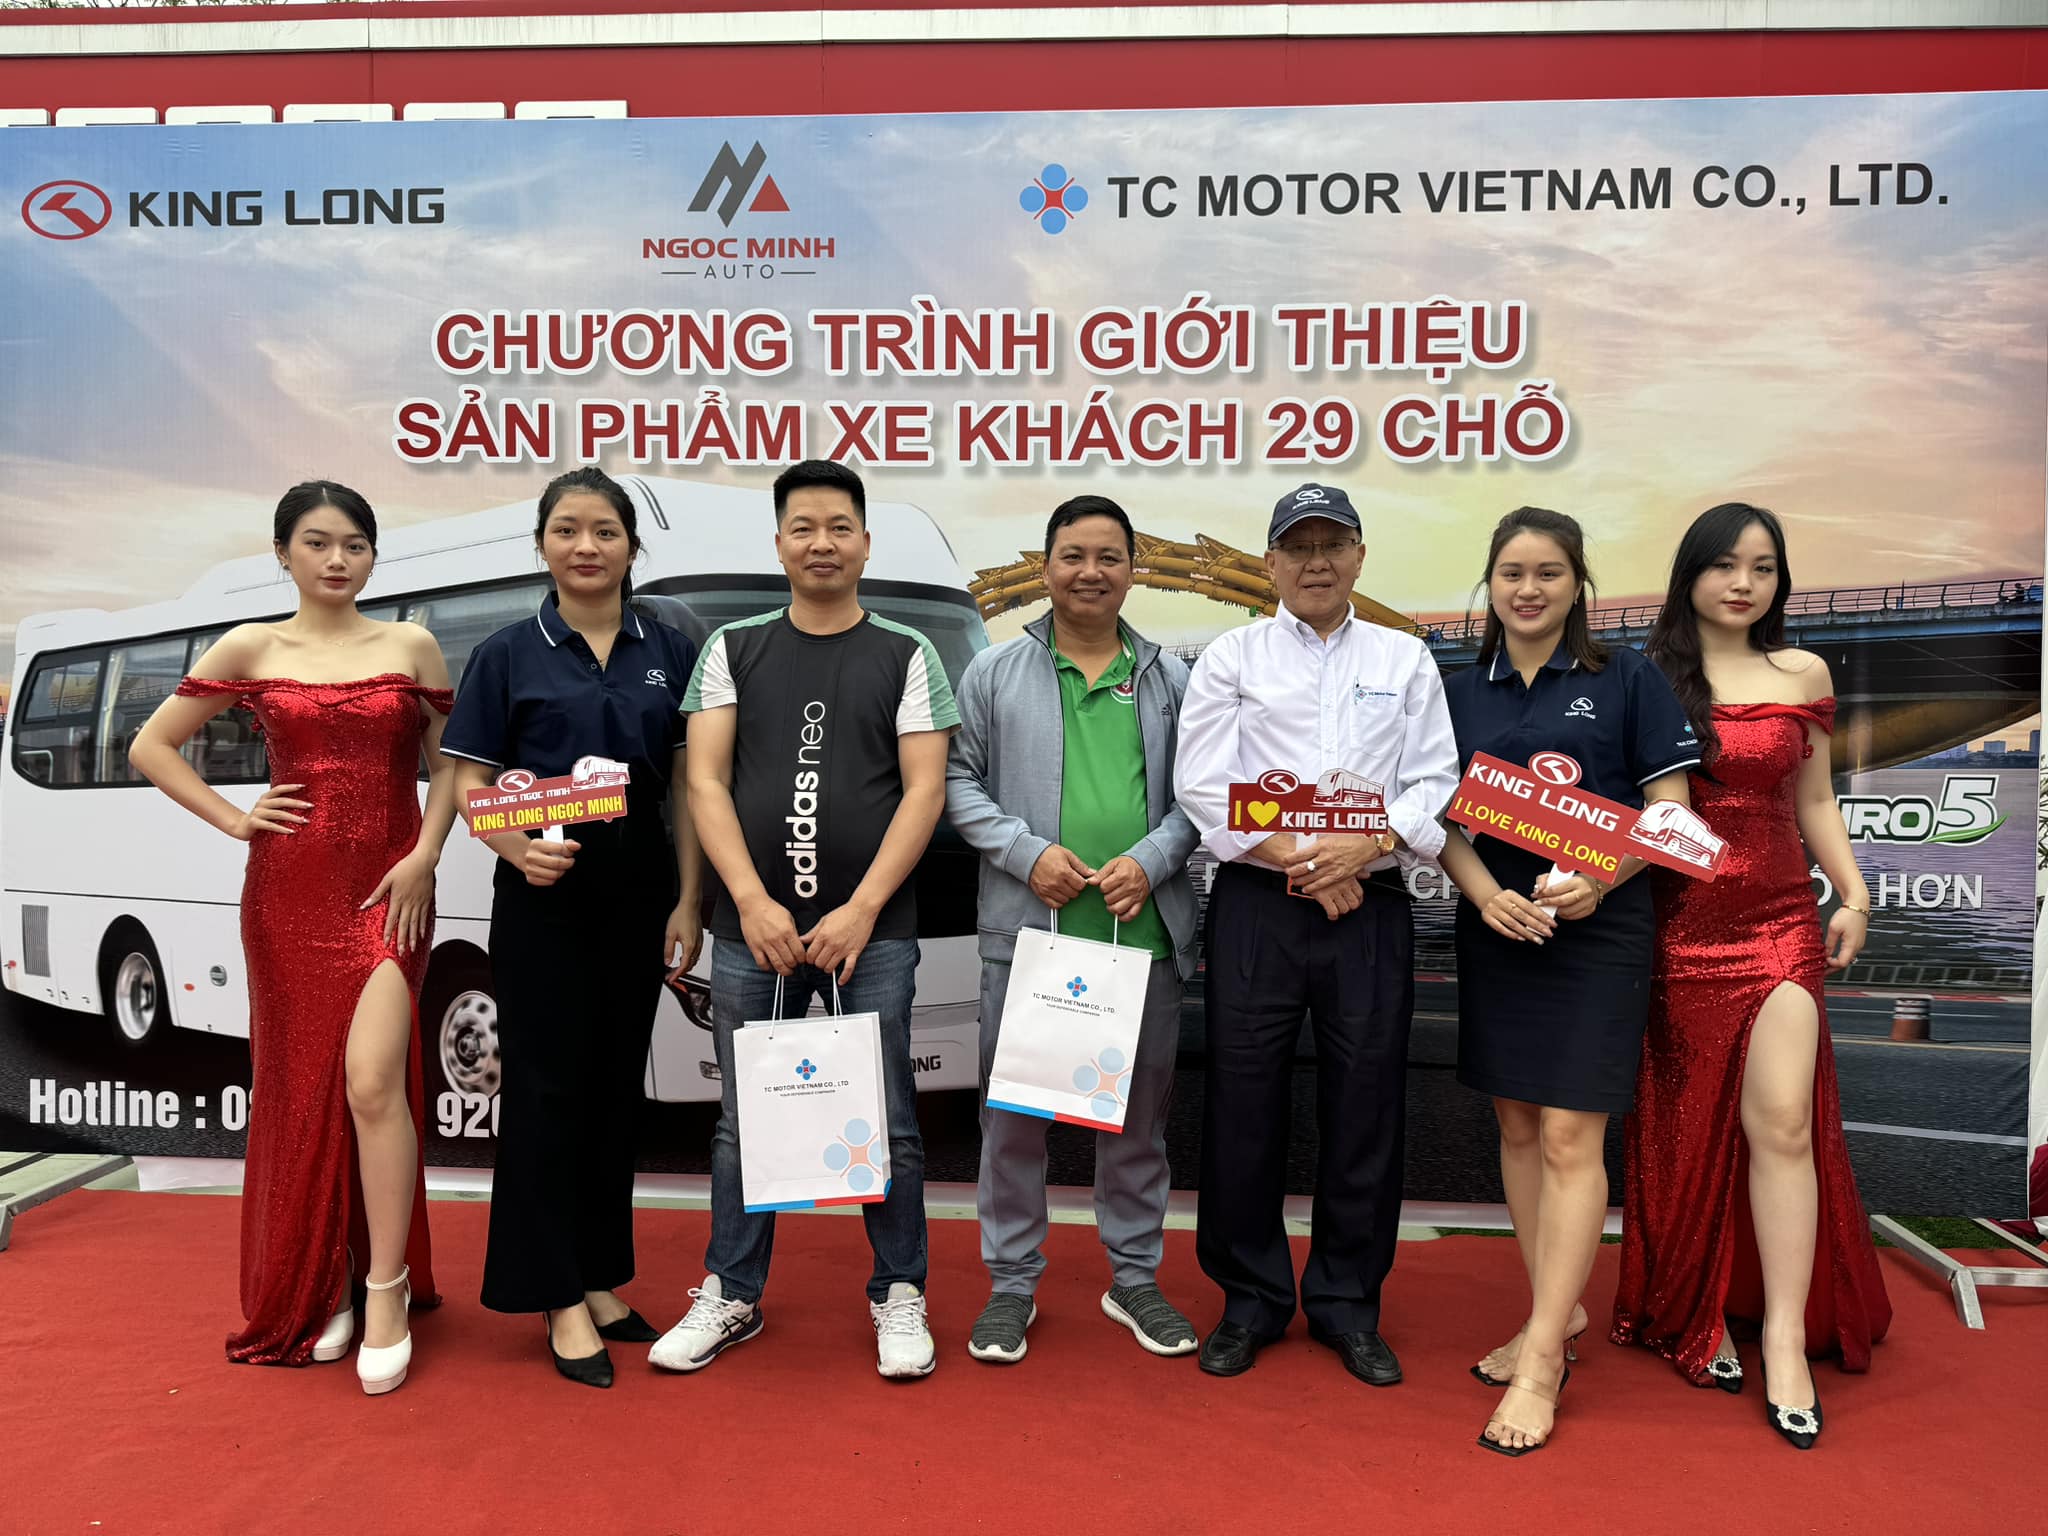 Roadshow 2024 event took place at King Long Au Lac (18-19/3/2024)